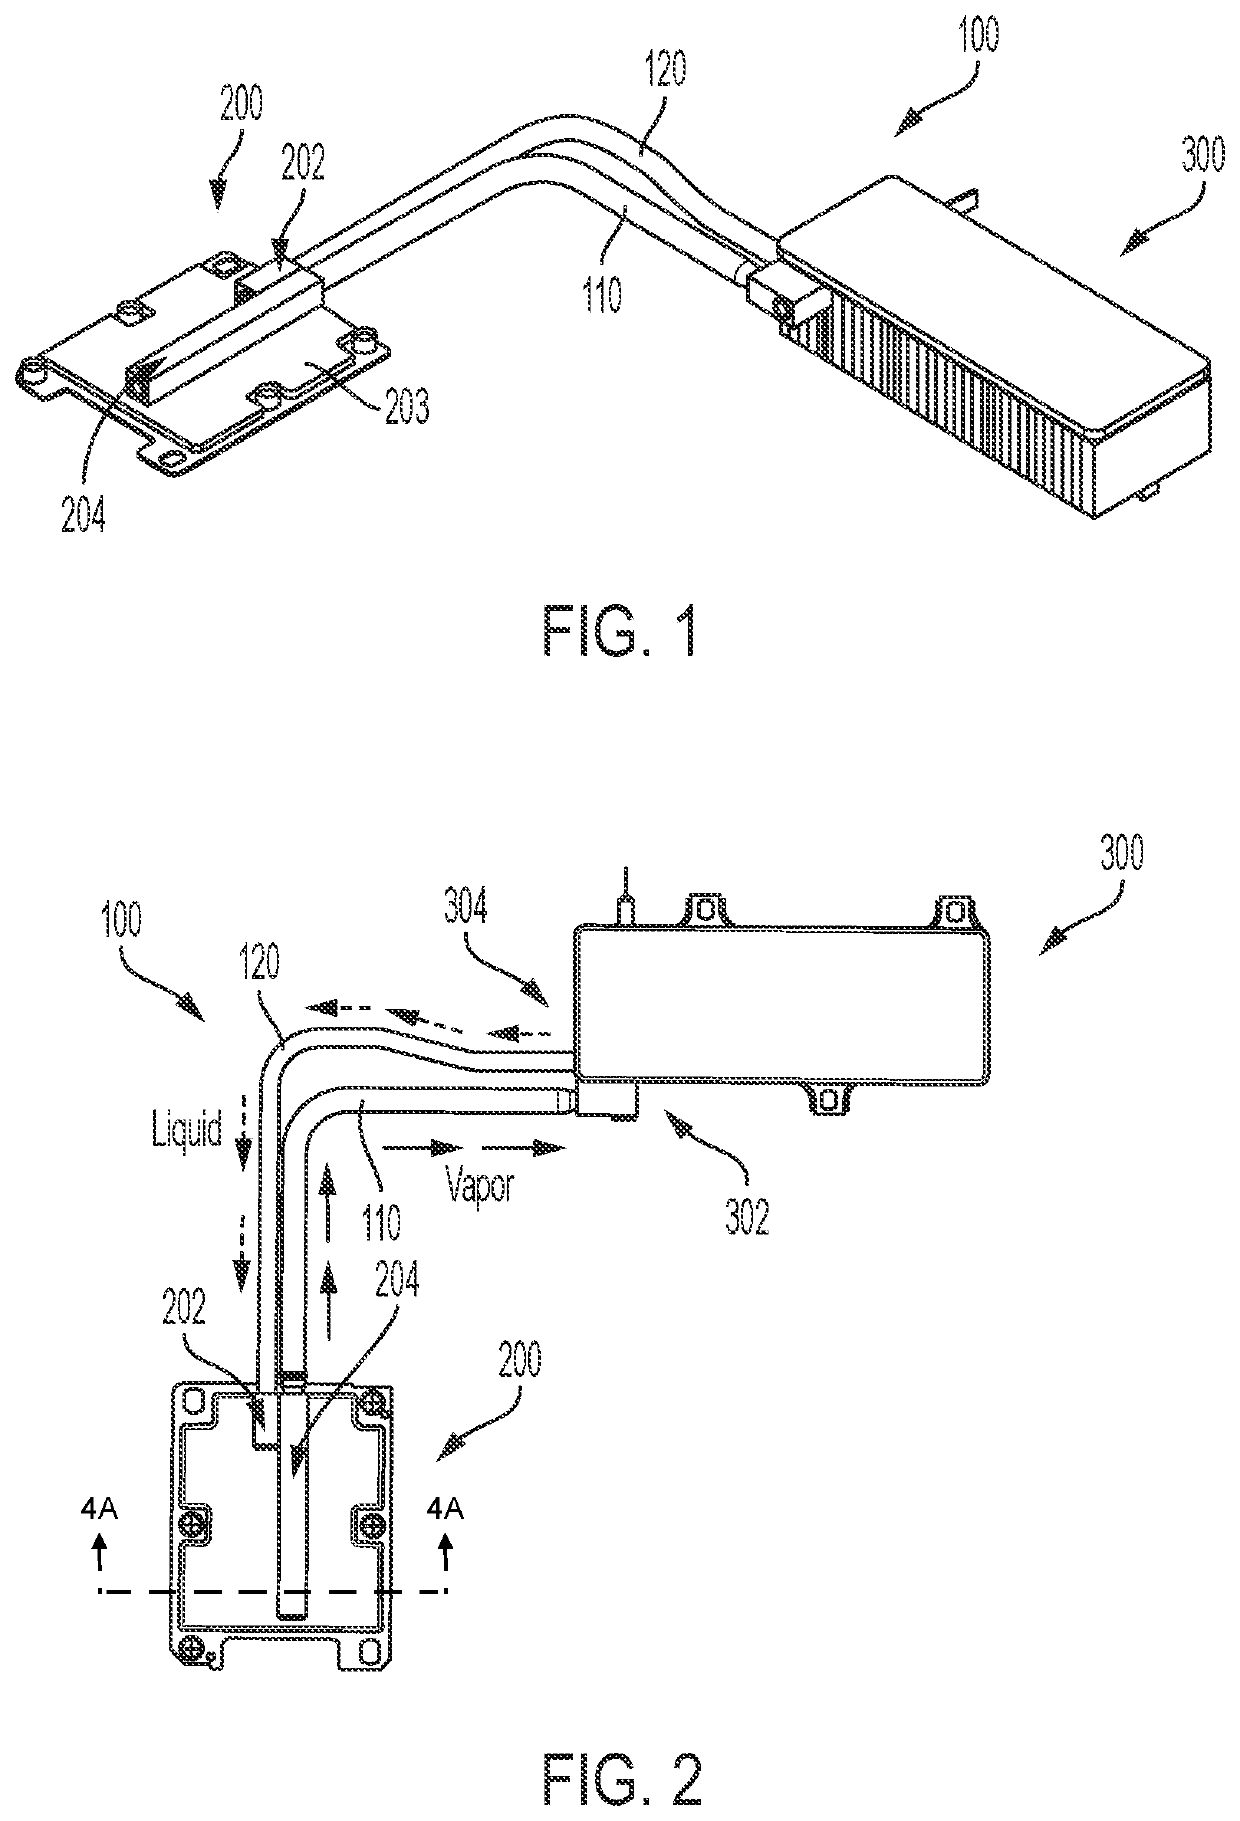 Loop thermosyphon devices and systems, and related methods